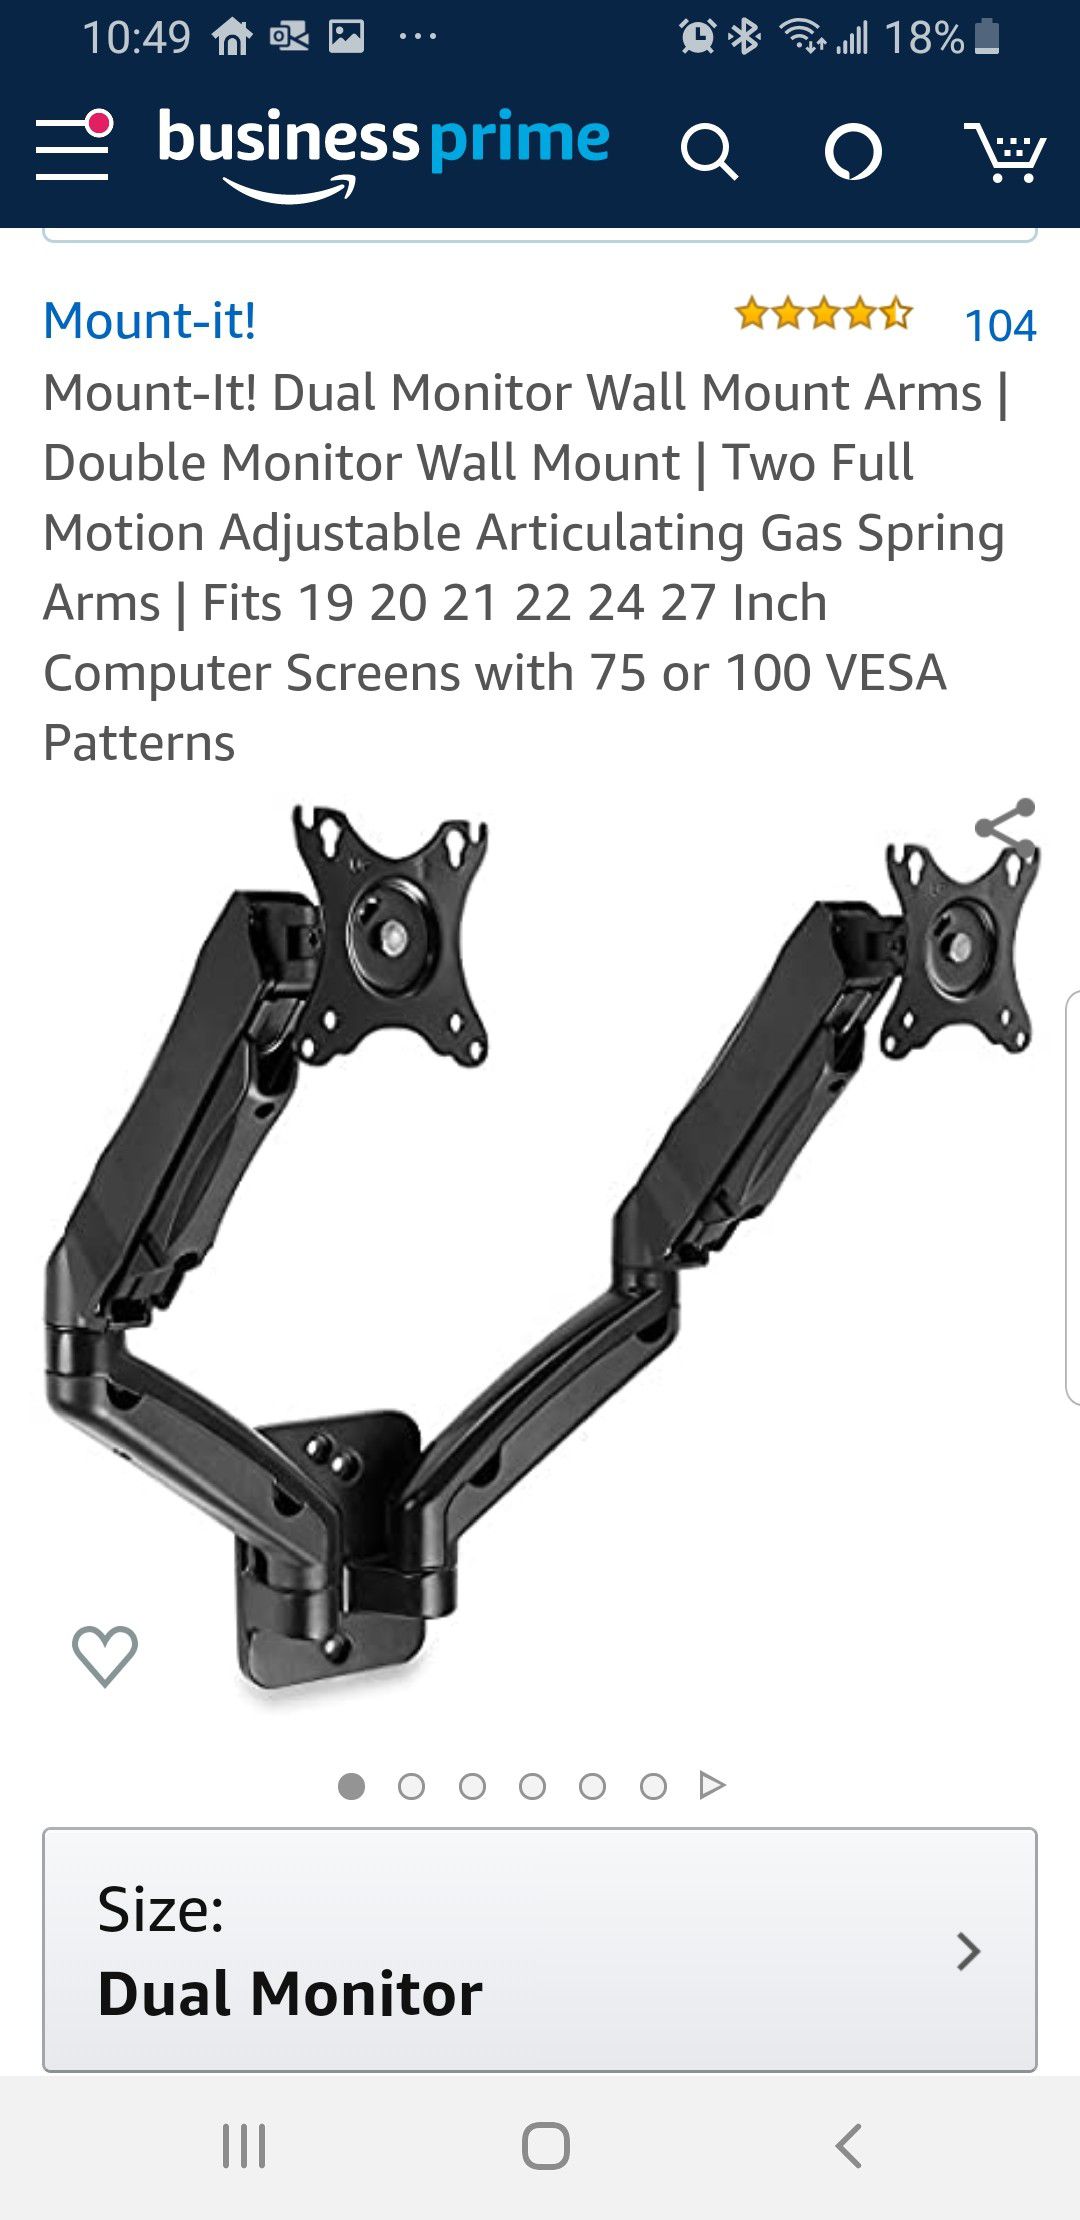 Mount-it Dual Monitor Arms